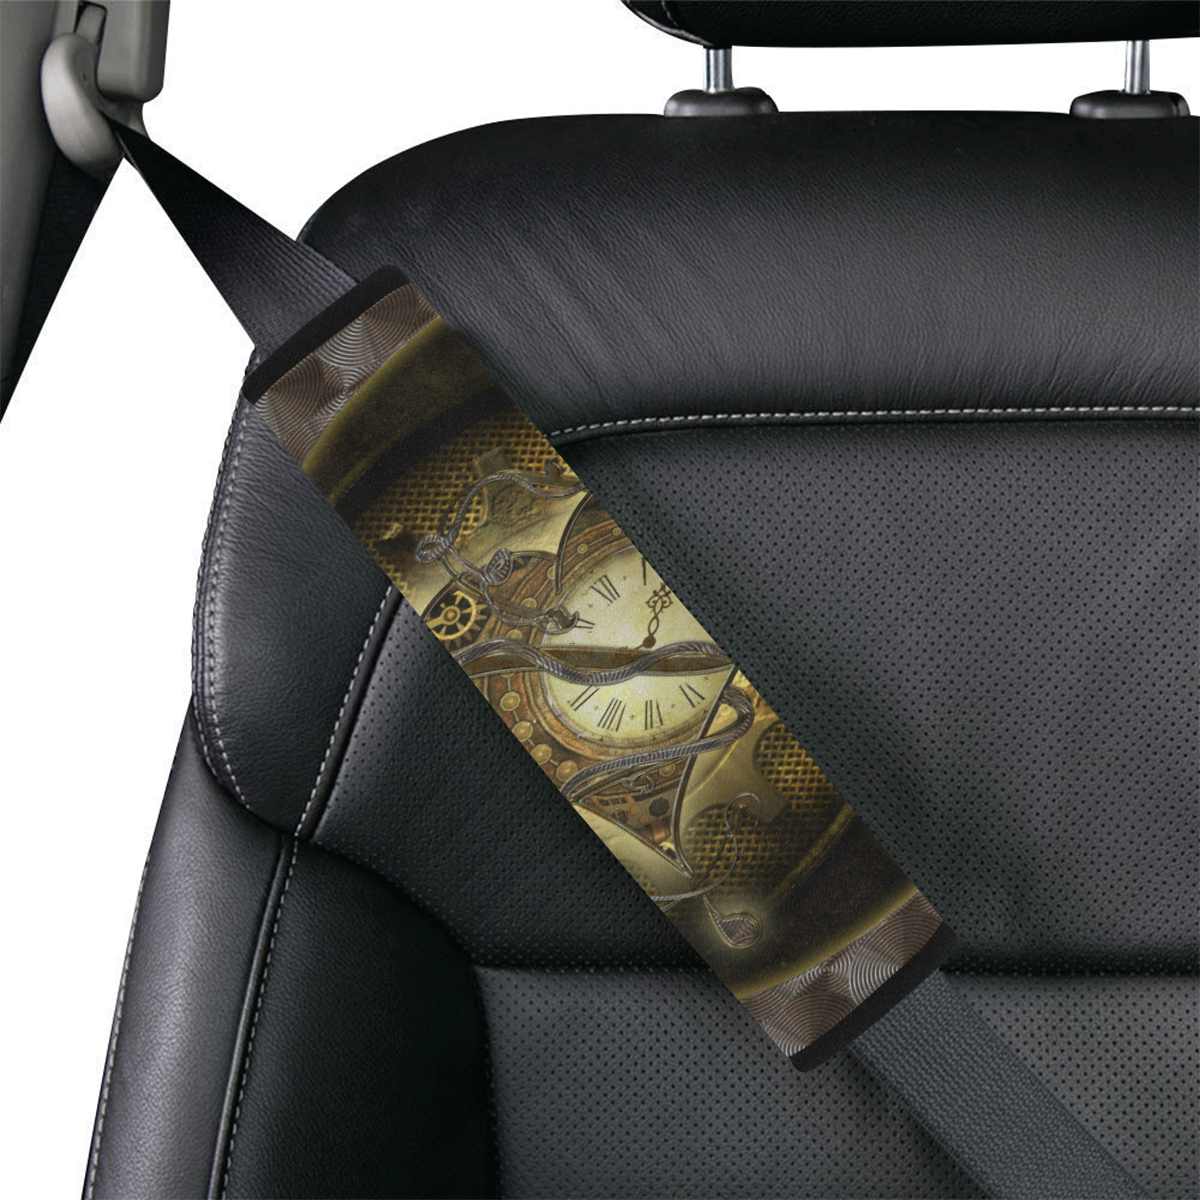 Awesome steampunk heart Car Seat Belt Cover 7''x12.6''